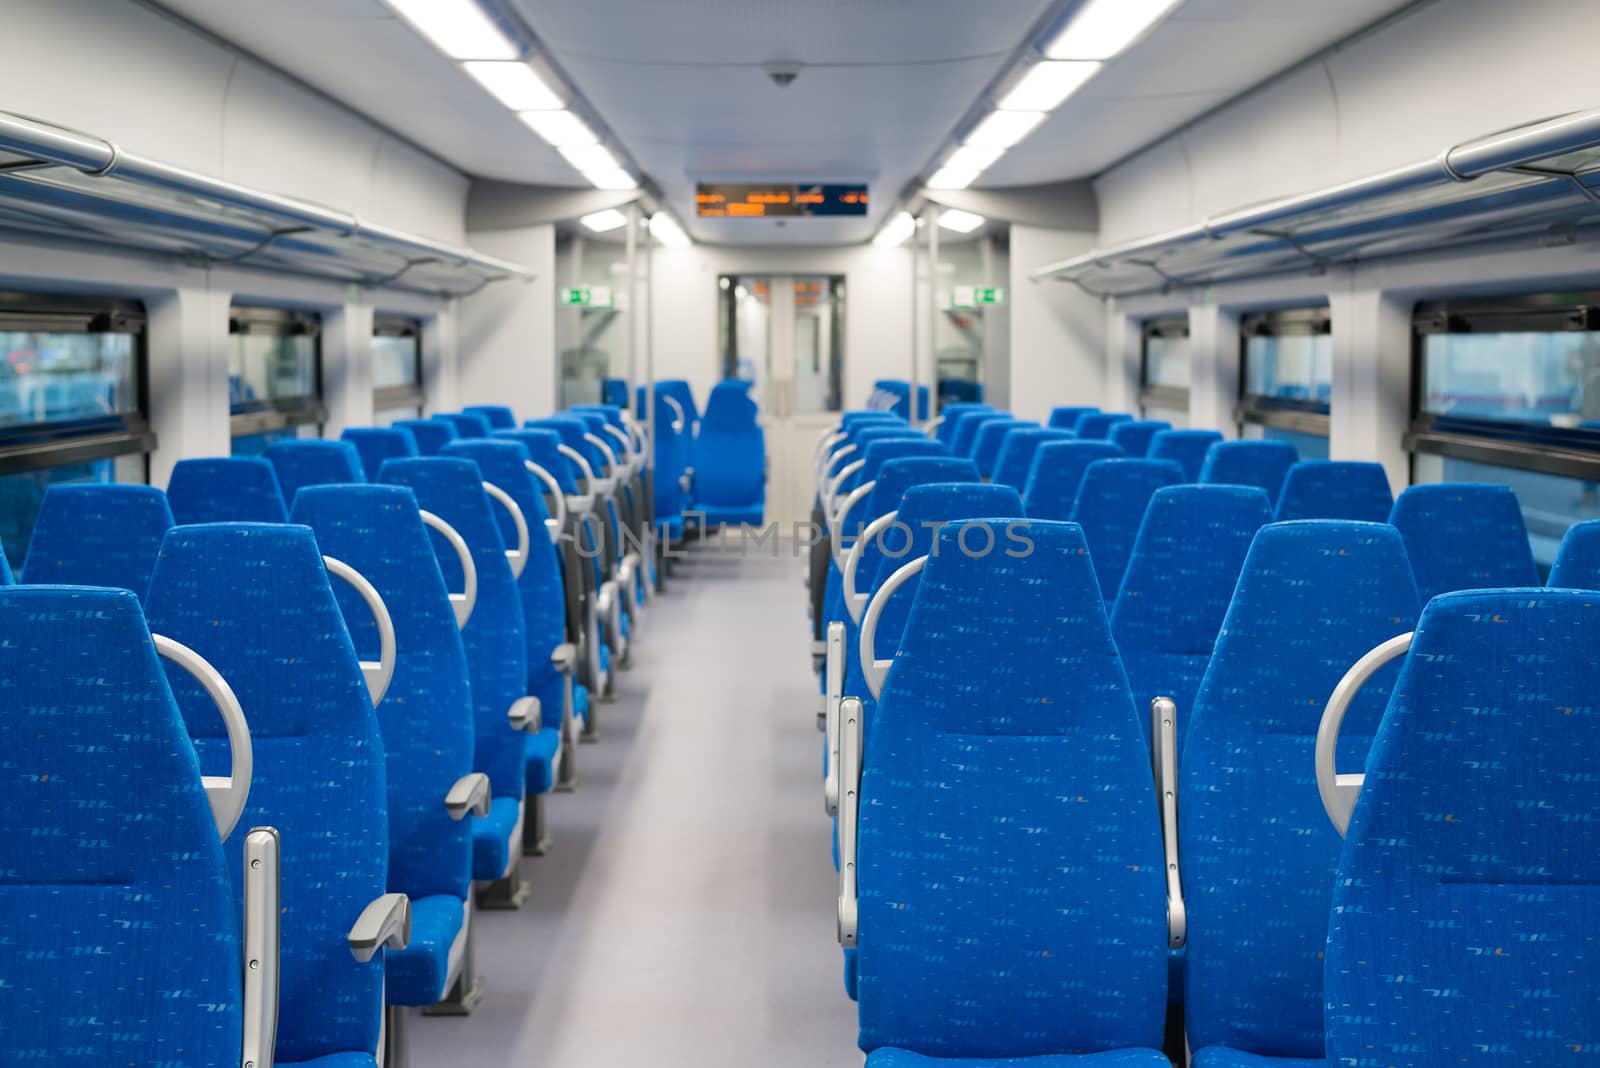 Interior high-speed electric train in a Moscow, Russia